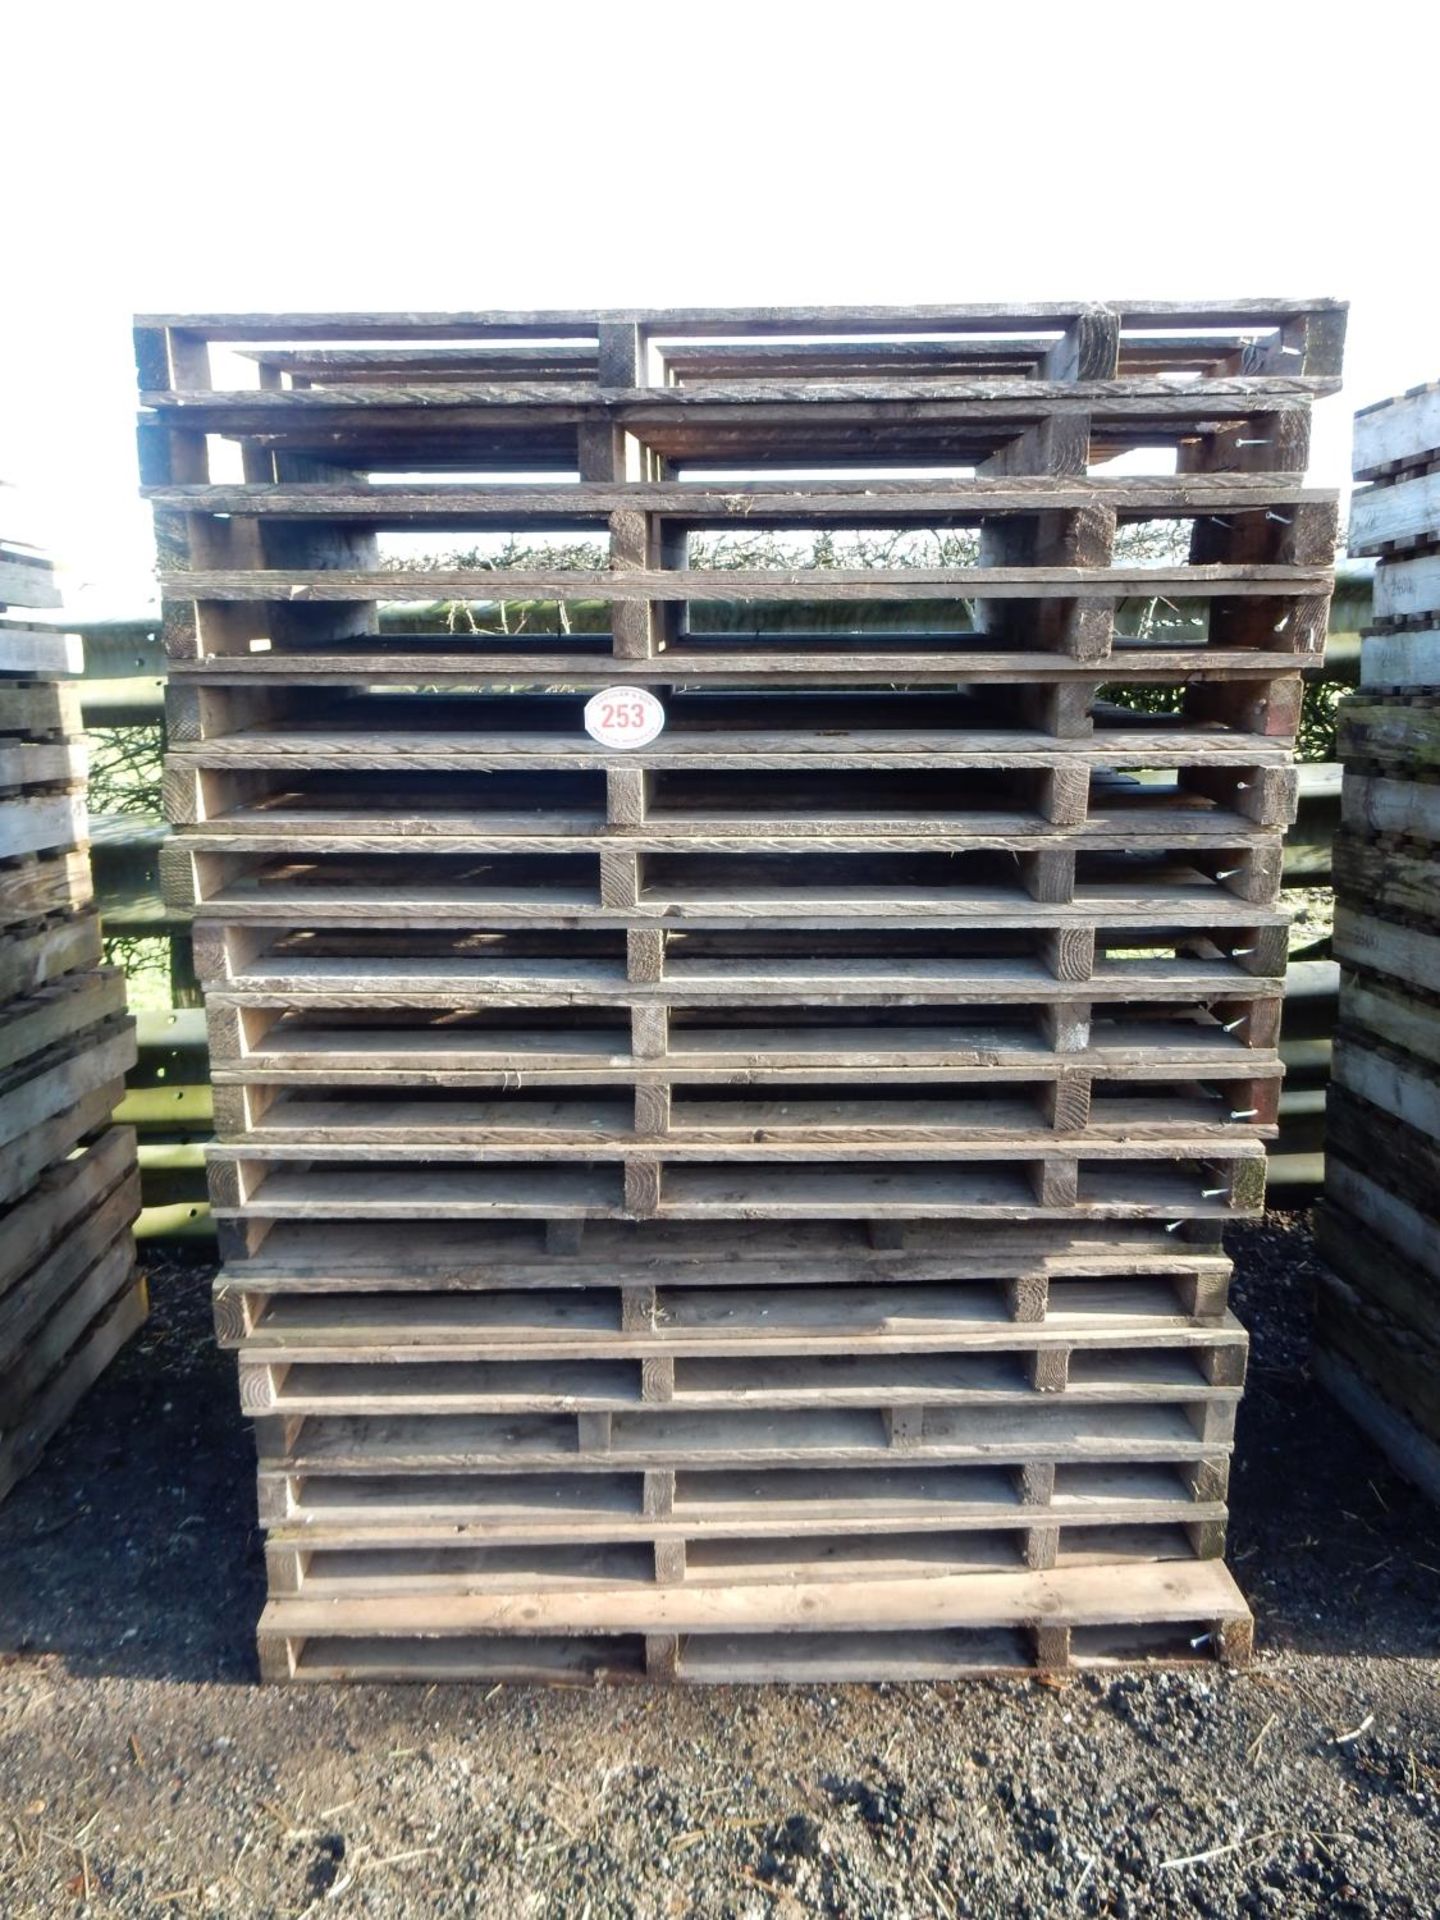 Quantity of 18 wooden pallets